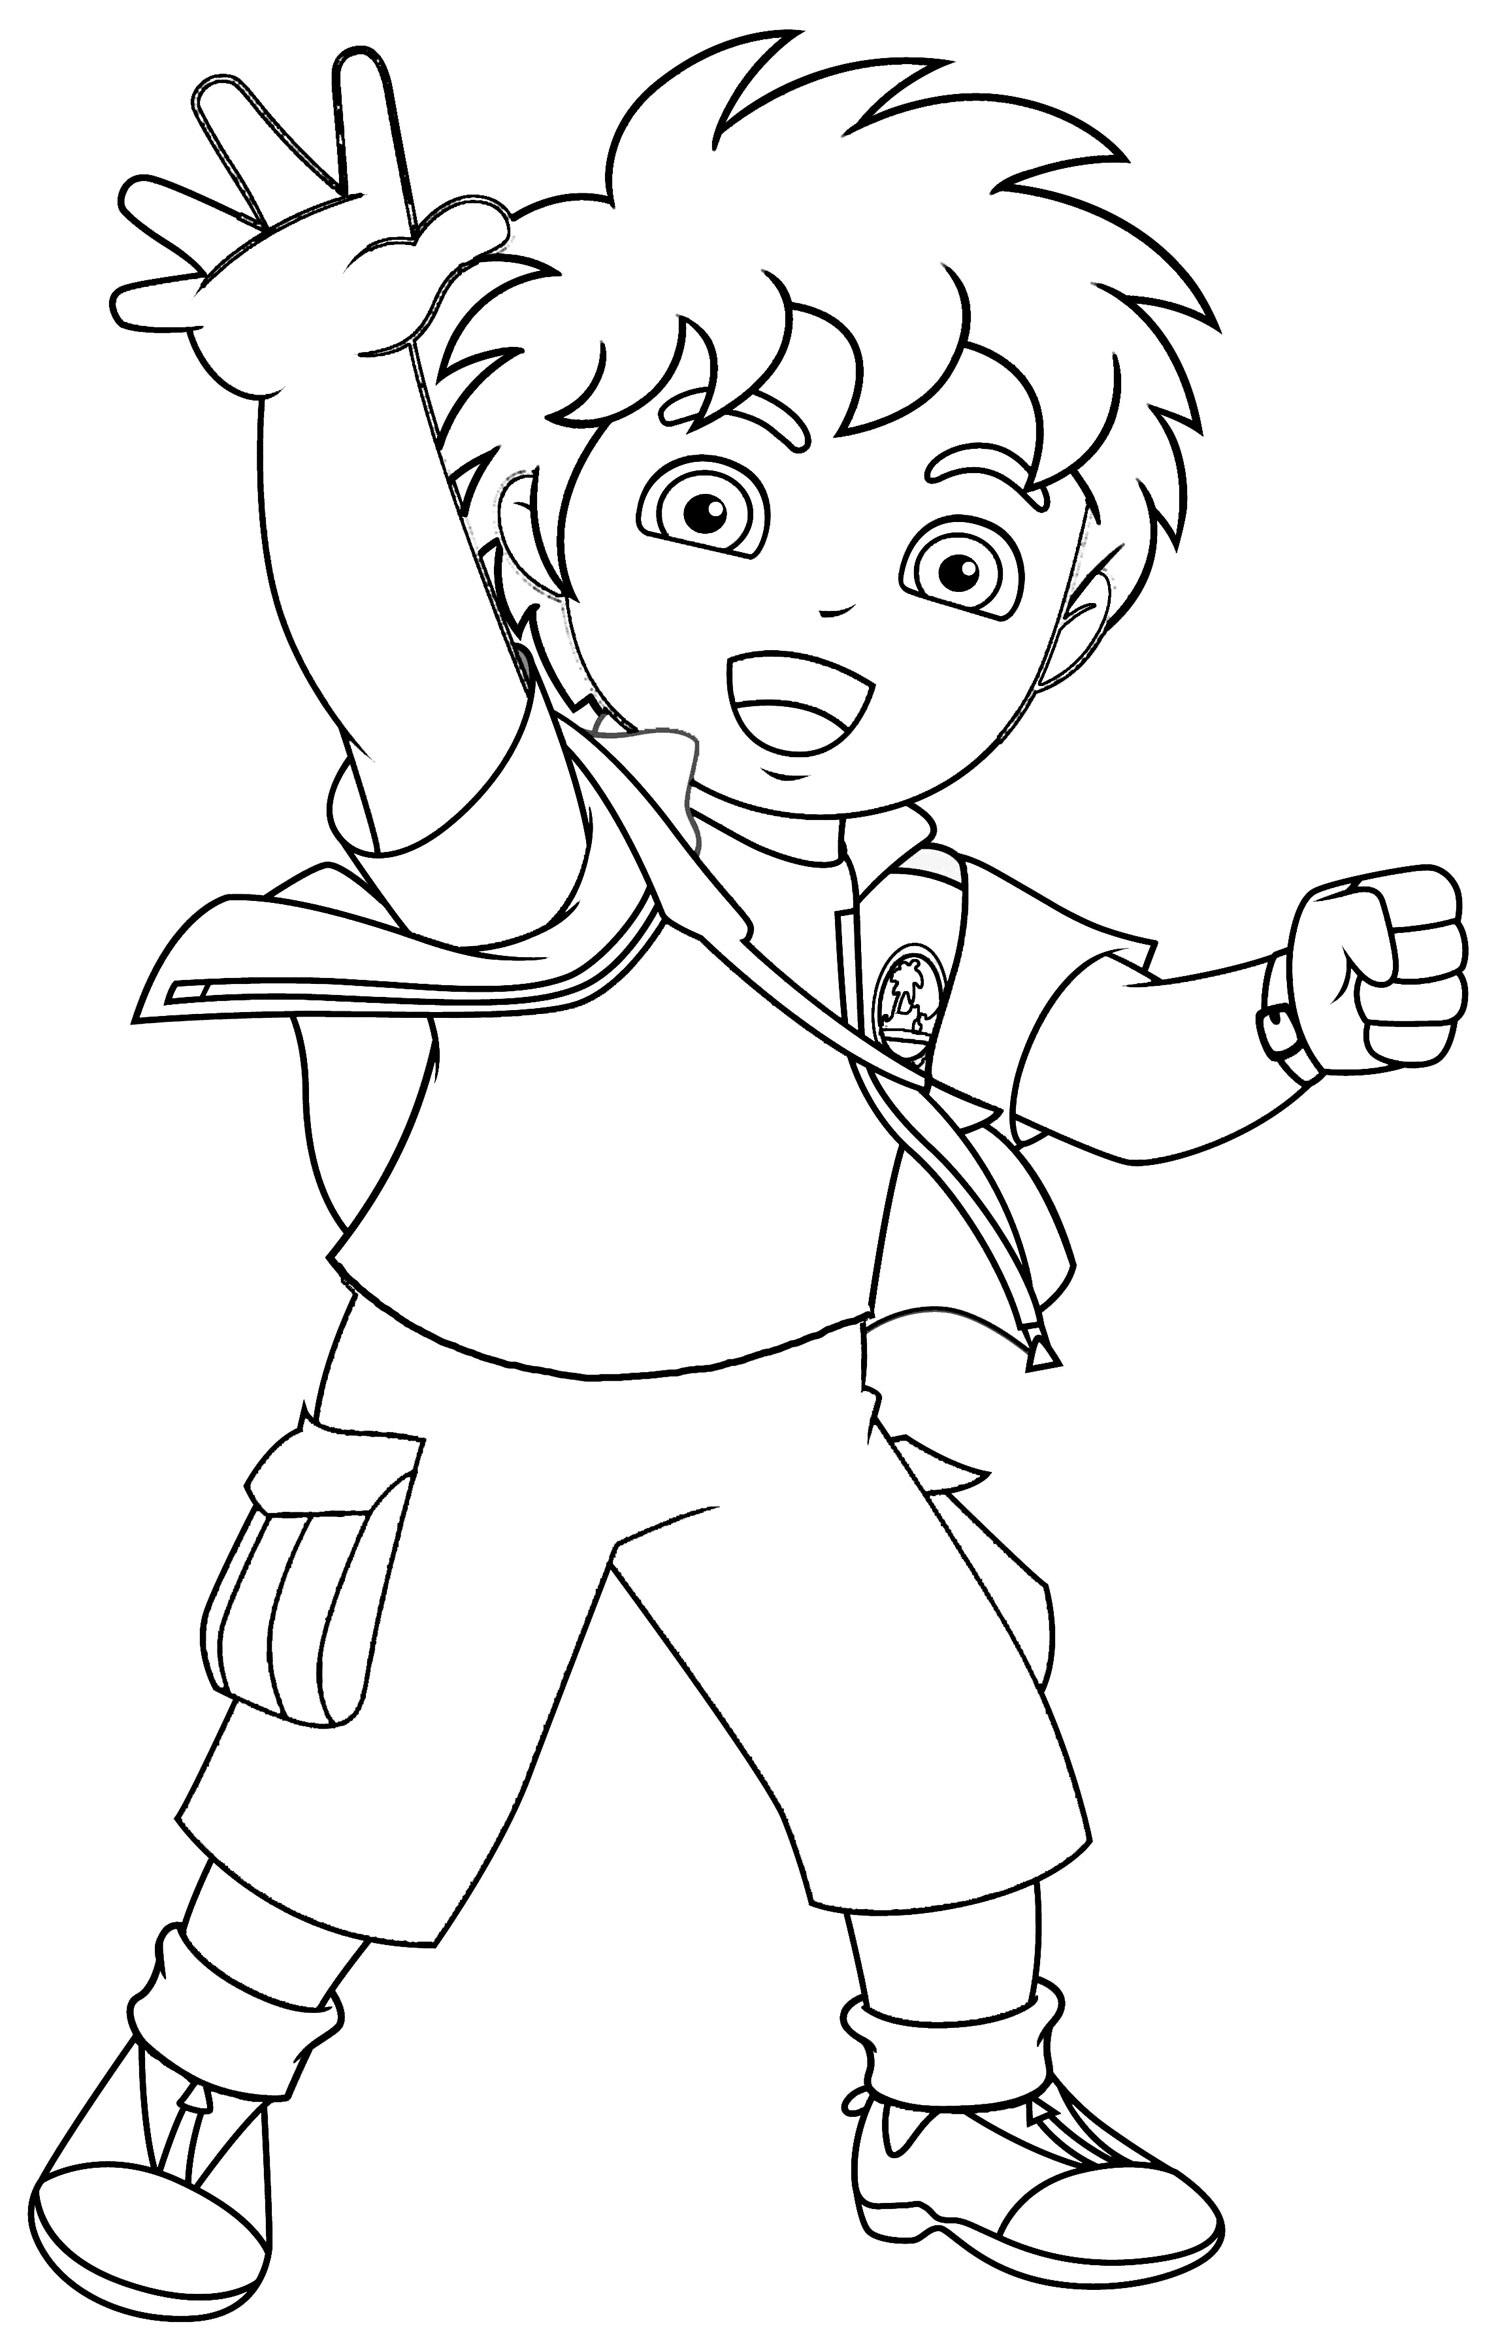 Free Printable Coloring Sheets for Kids Diego